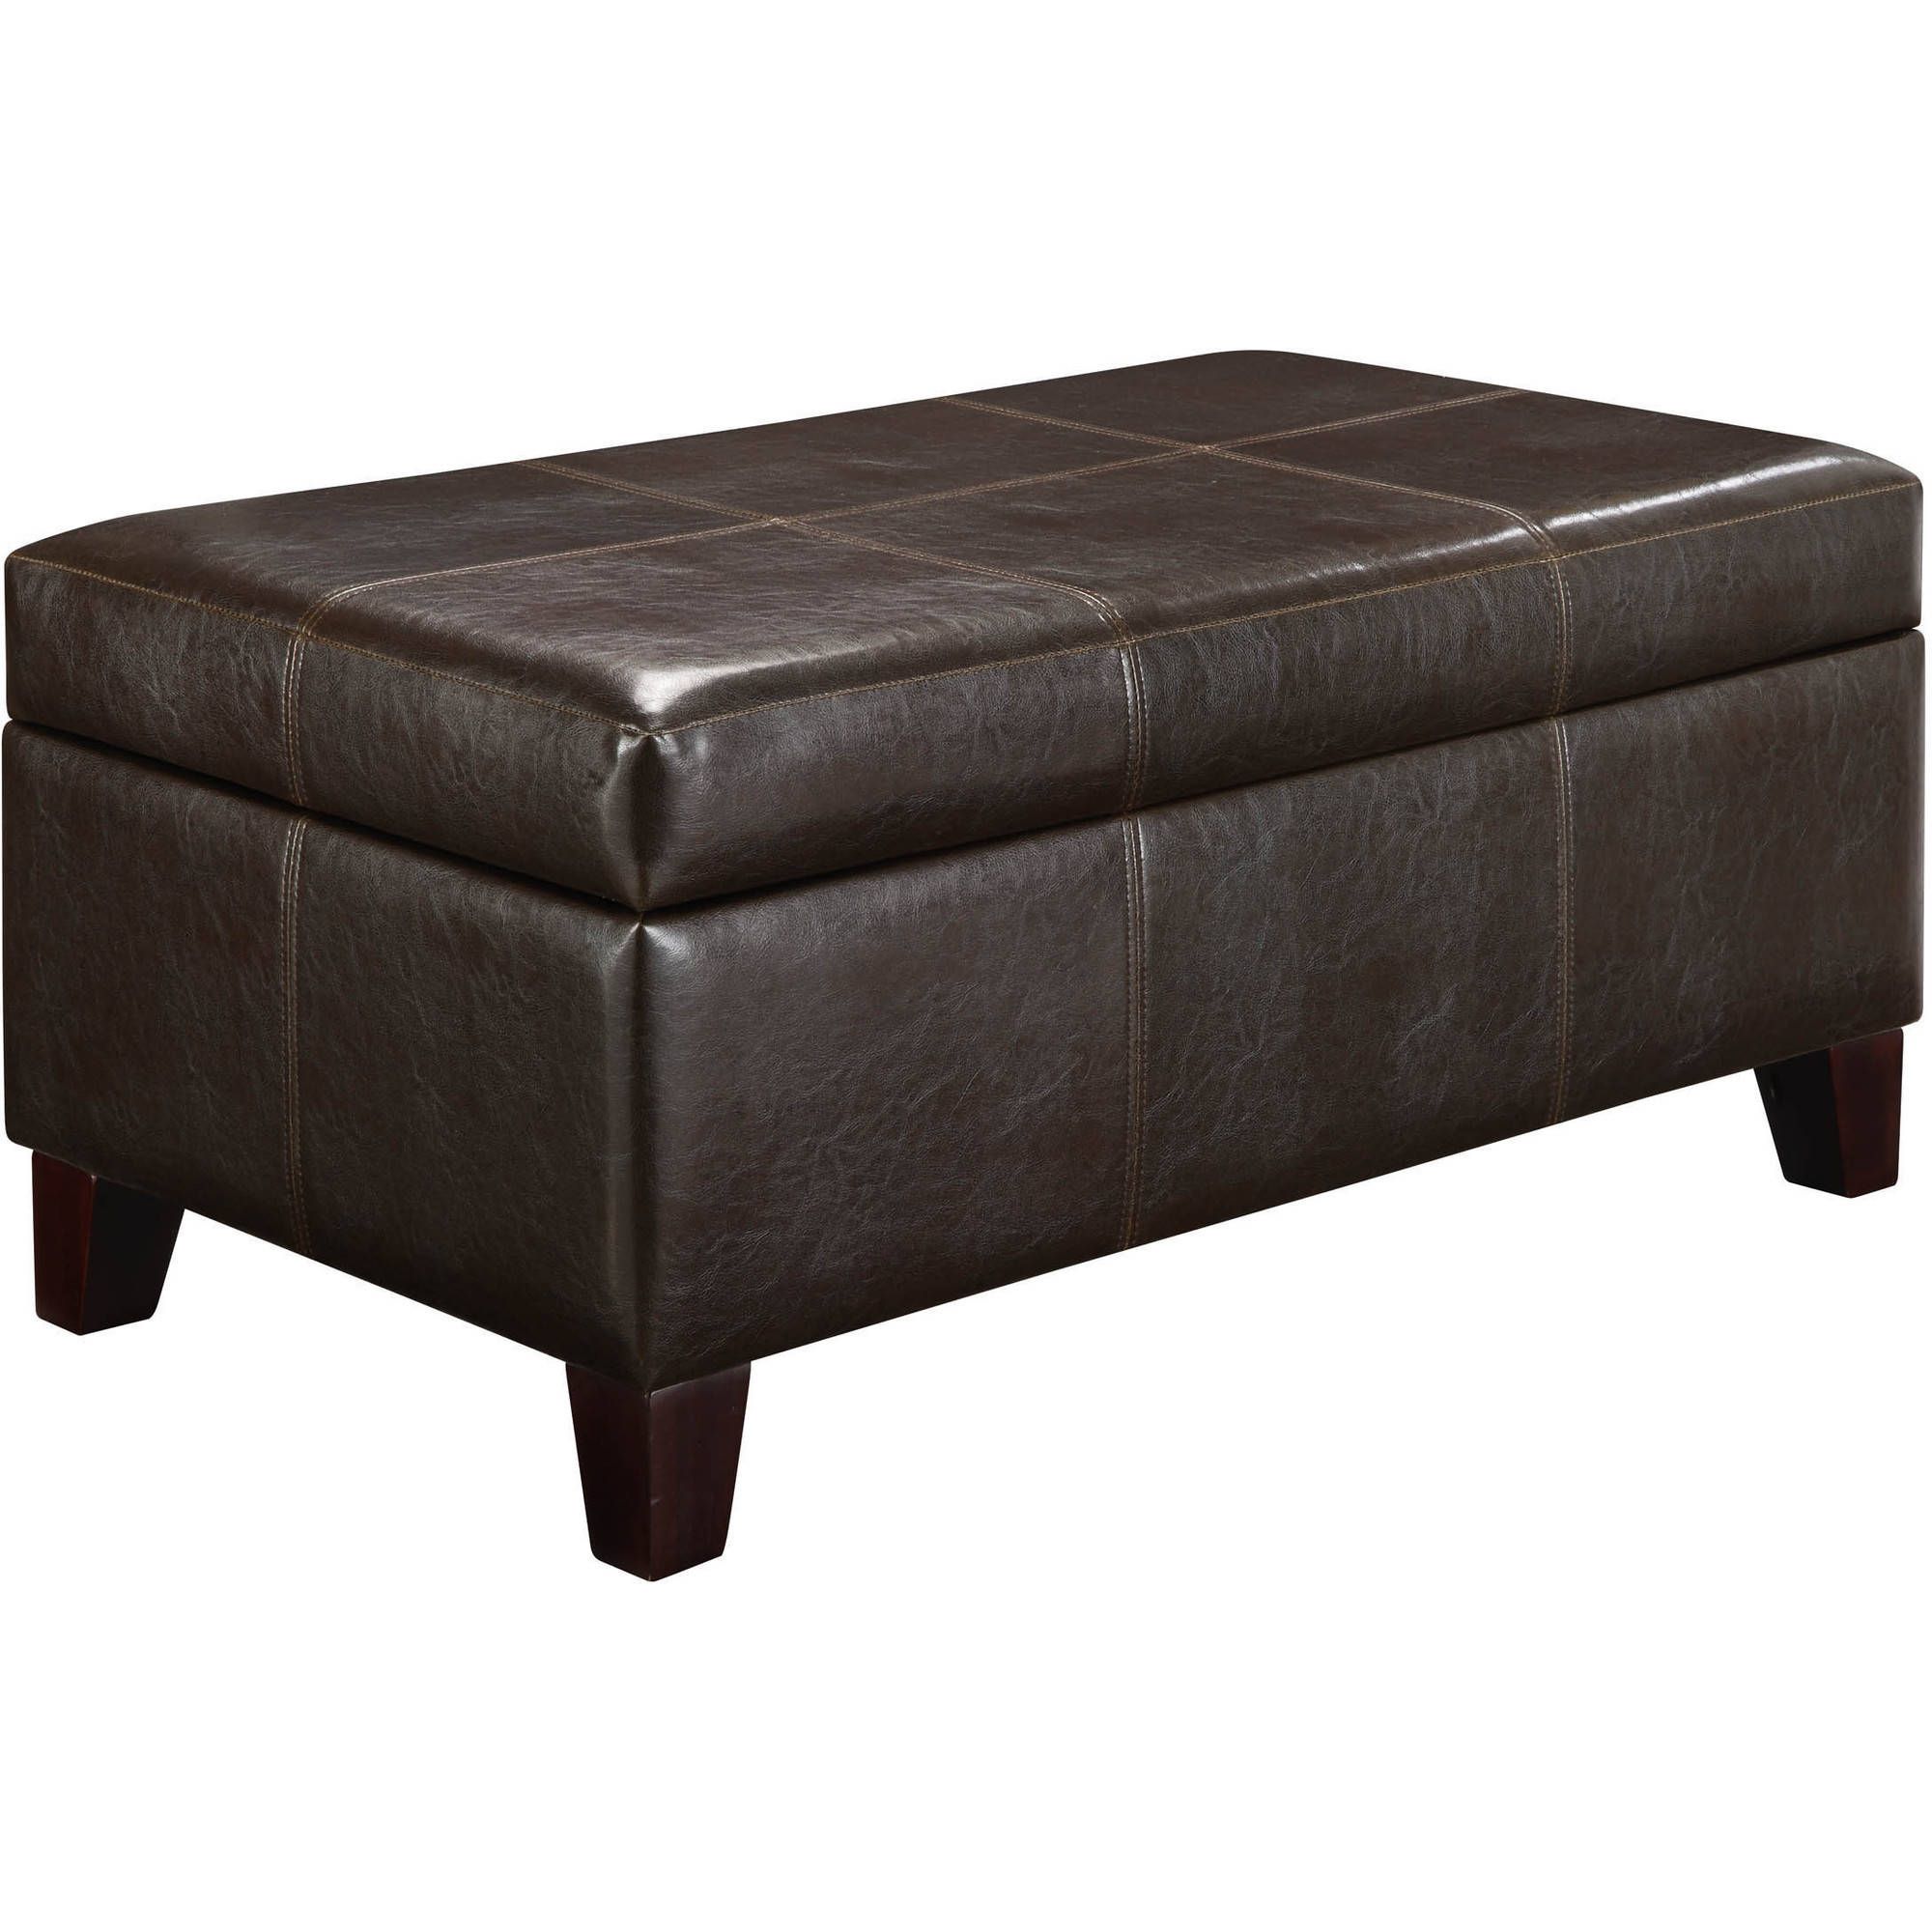 Small Leather Look Vinyl Ottoman – Walmart With Navy And Dark Brown Jute Pouf Ottomans (View 18 of 20)